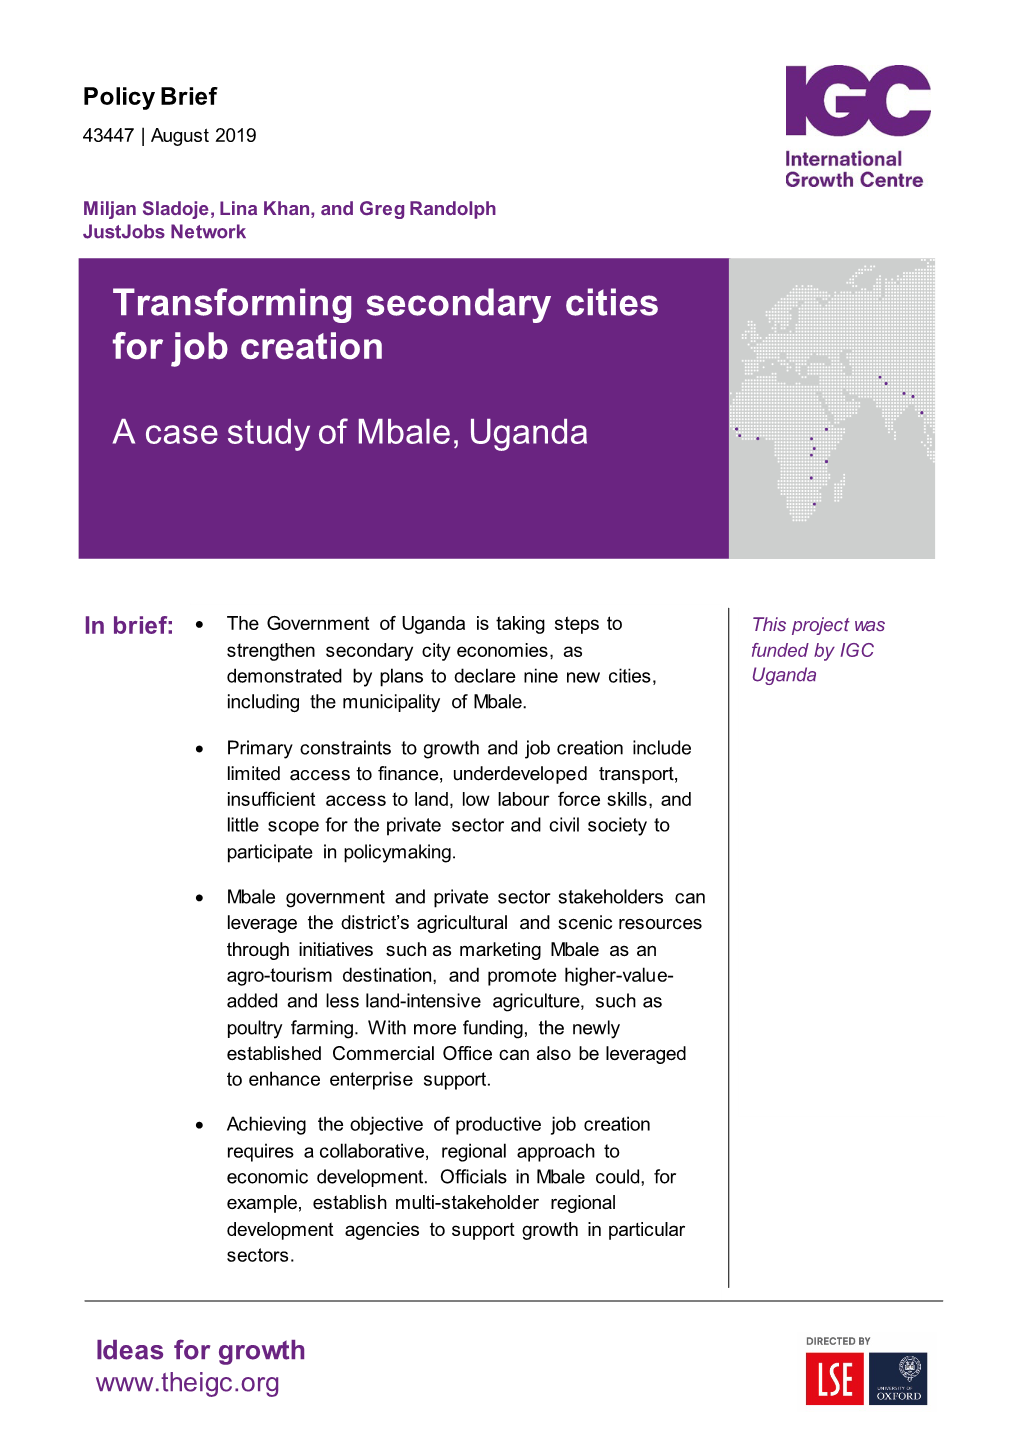 Transforming Secondary Cities for Job Creation